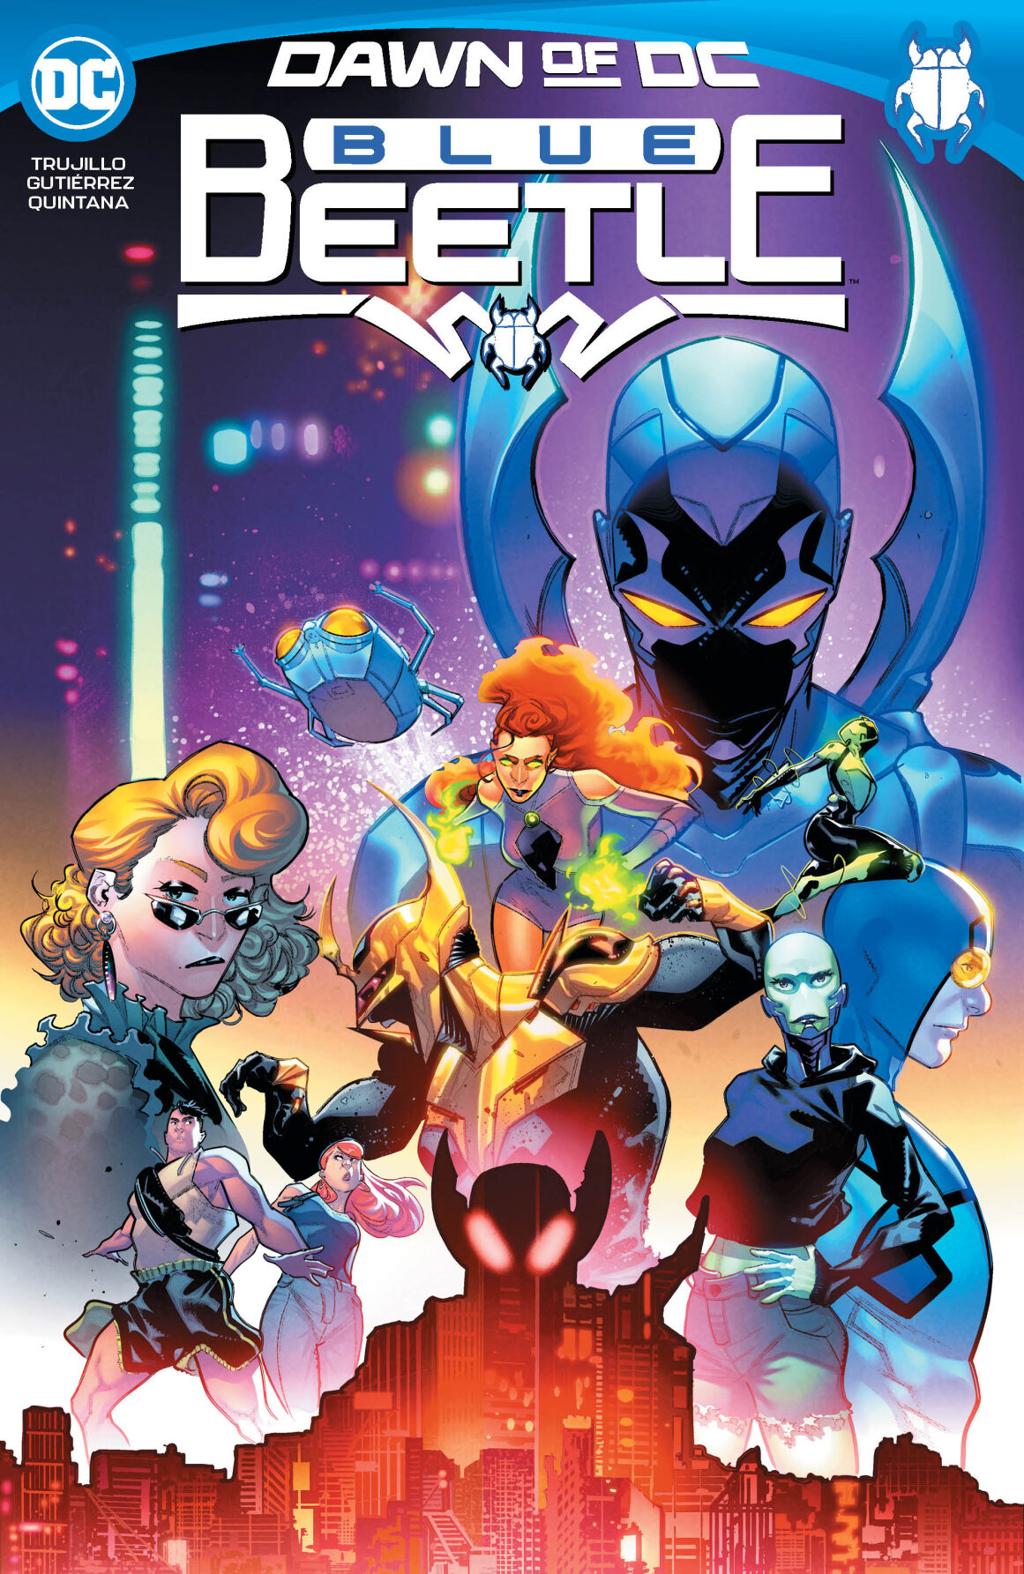 Beetle Blue Beetle Movie Gets New Online Release Date — The Comic Book Cast